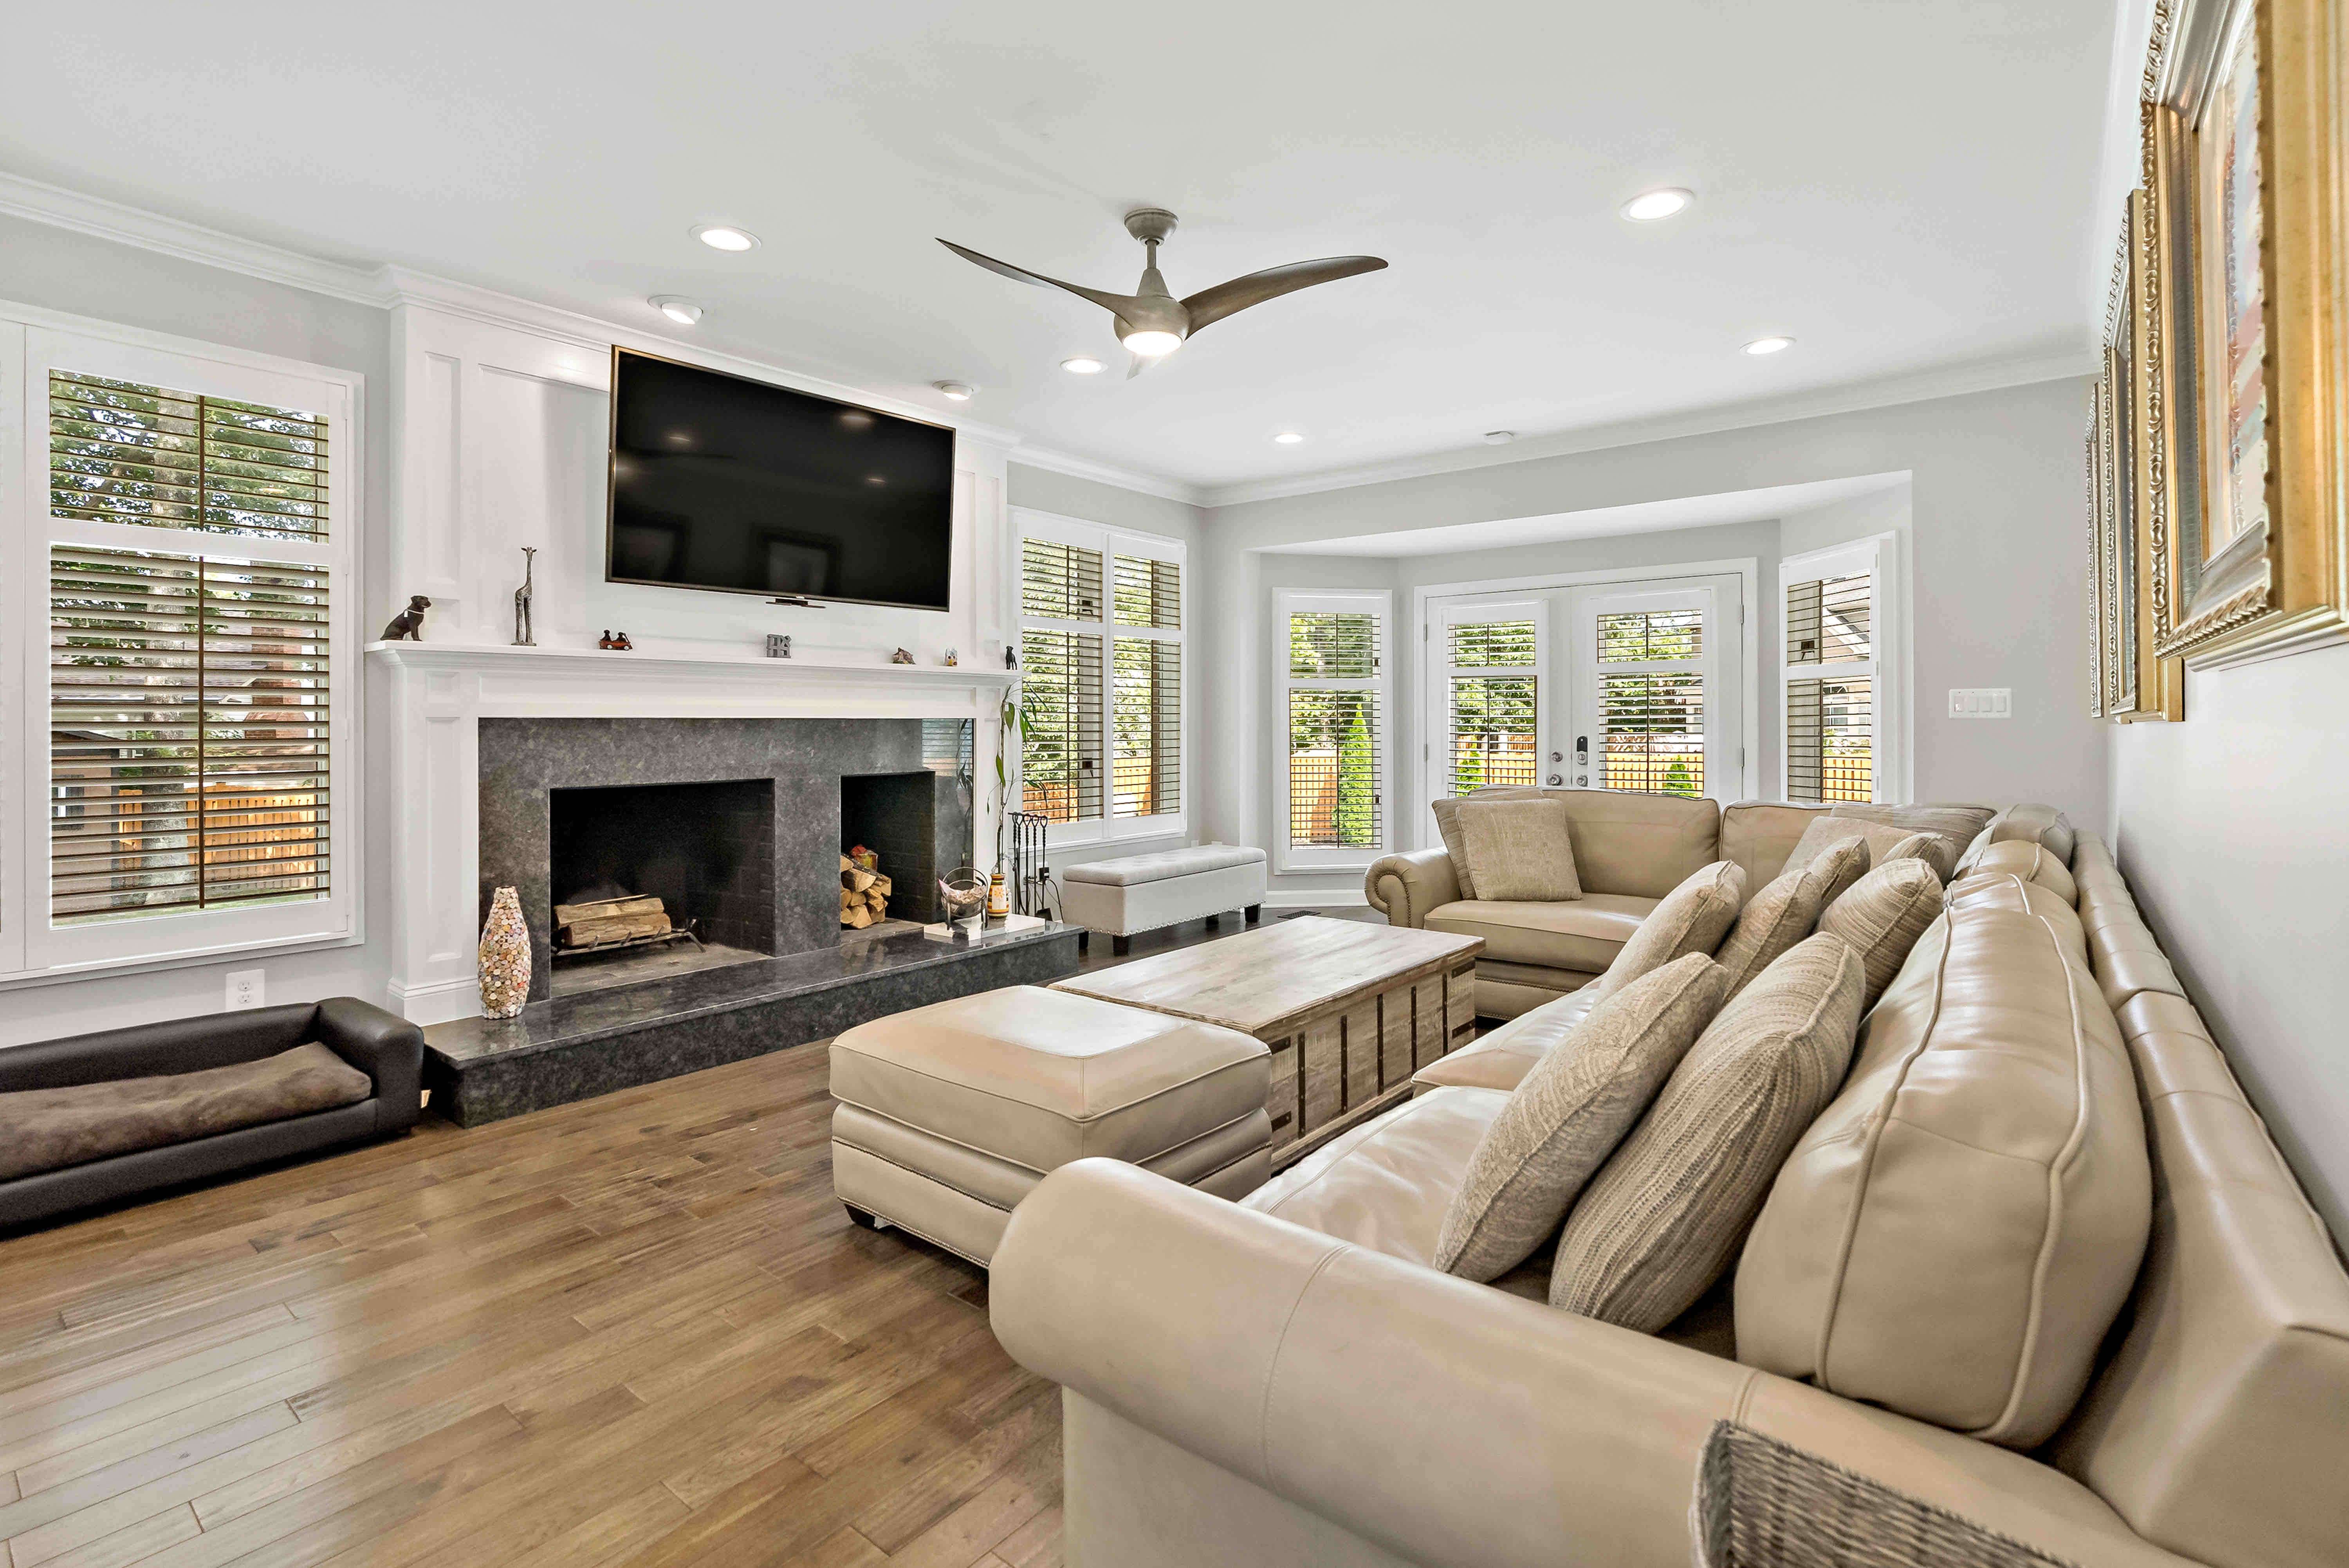 Living room with fireplace and hardwood floors